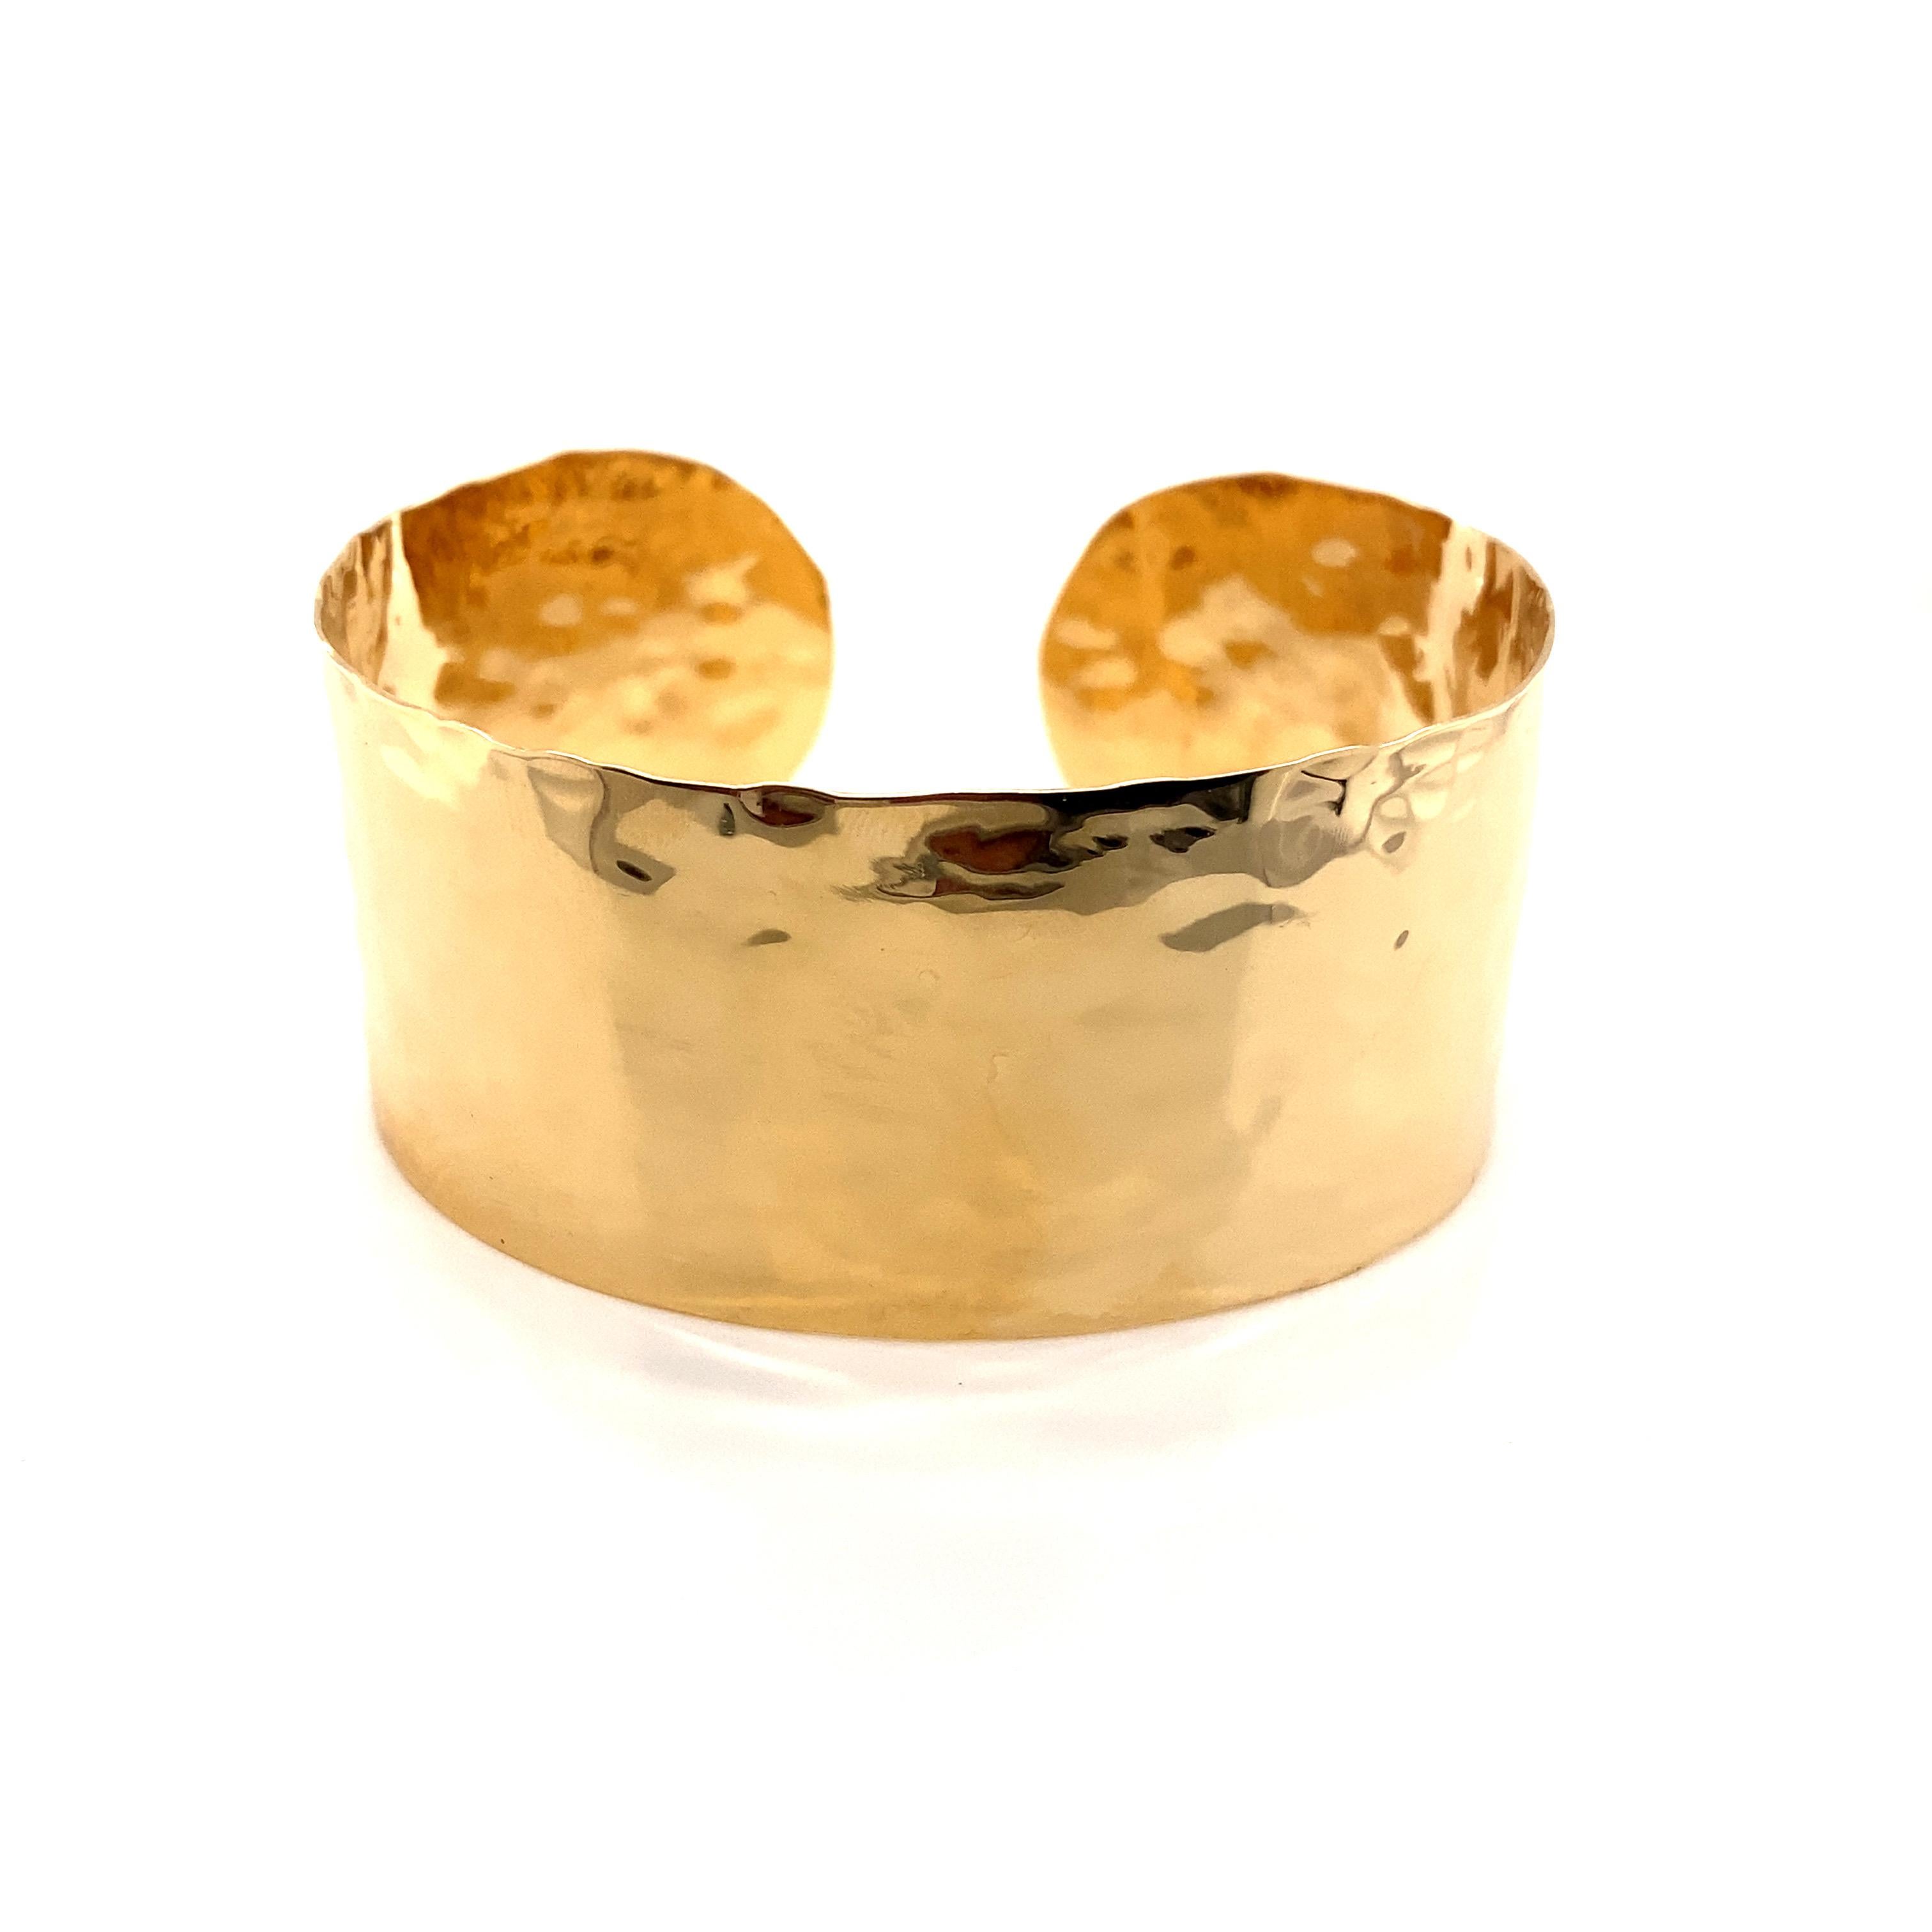 Vintage 1990’s 14k yellow gold wide hammered cuff bangle bracelet. The cuff measures just over 1 inch wide and weighs 23.25g.